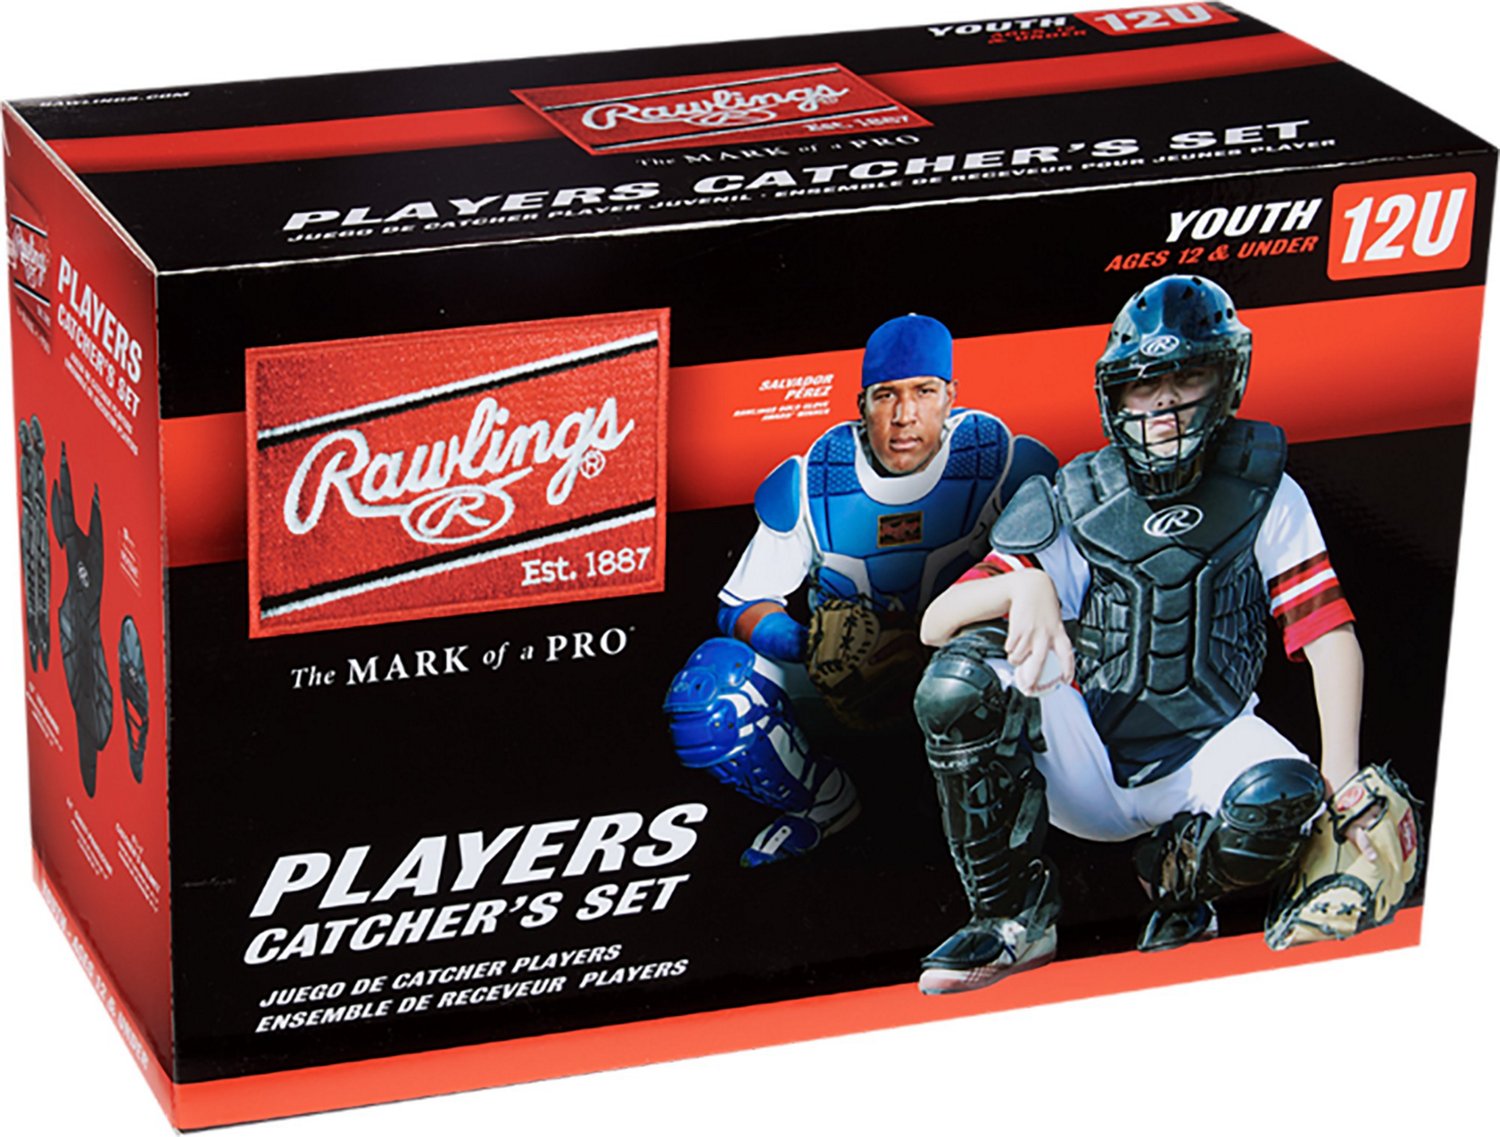 All Star Youth Player's Series Catcher's Set